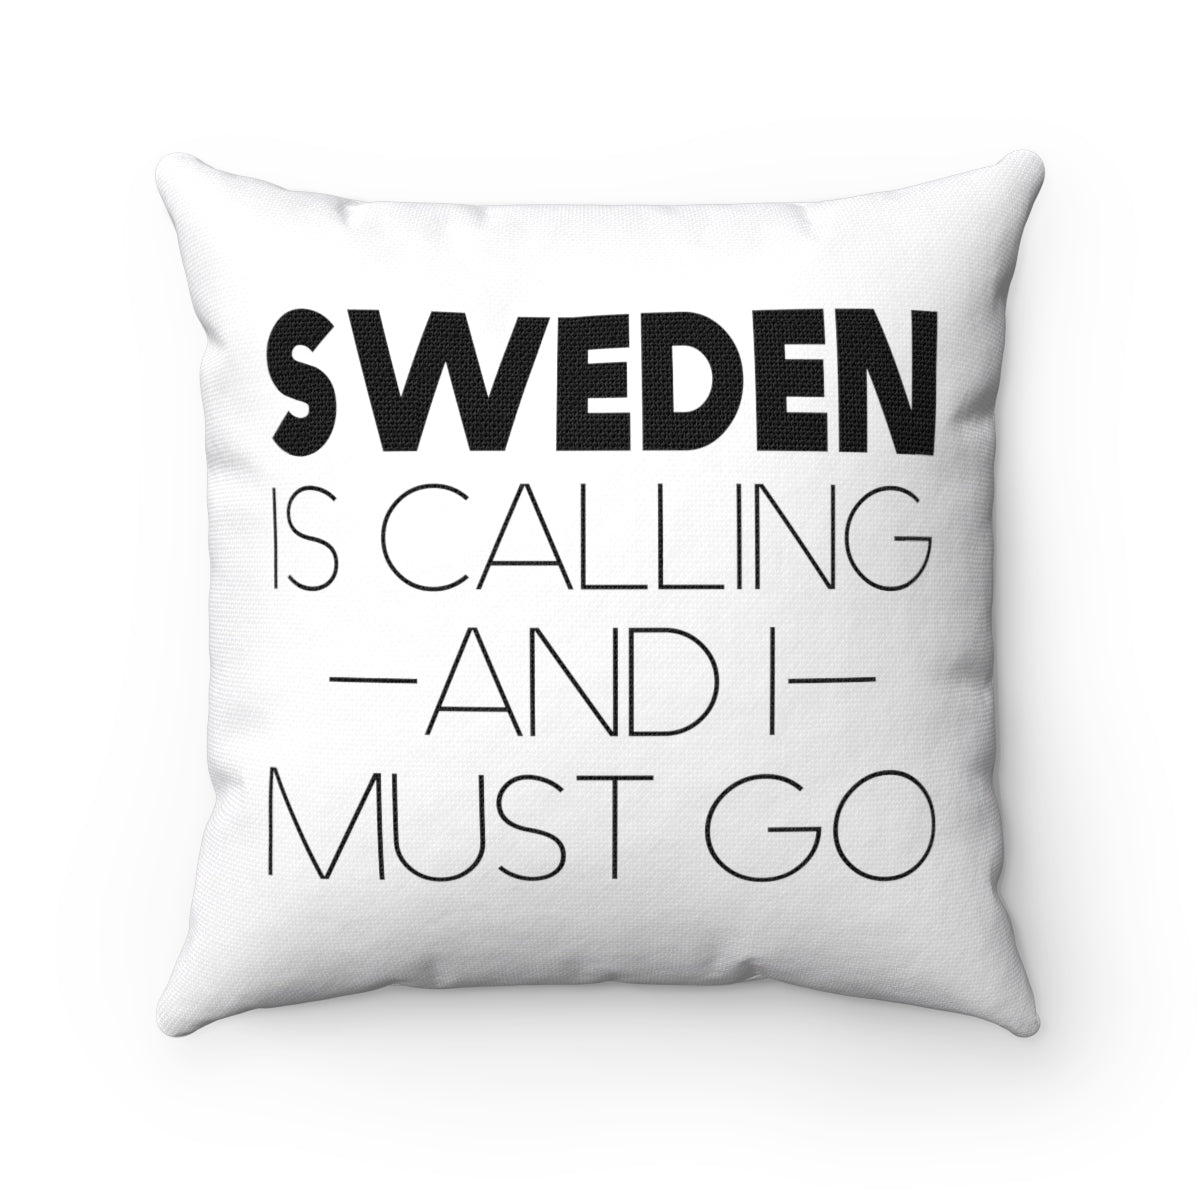 Sweden Is Calling And I Must Go Square Pillow Cover Scandinavian Design Studio